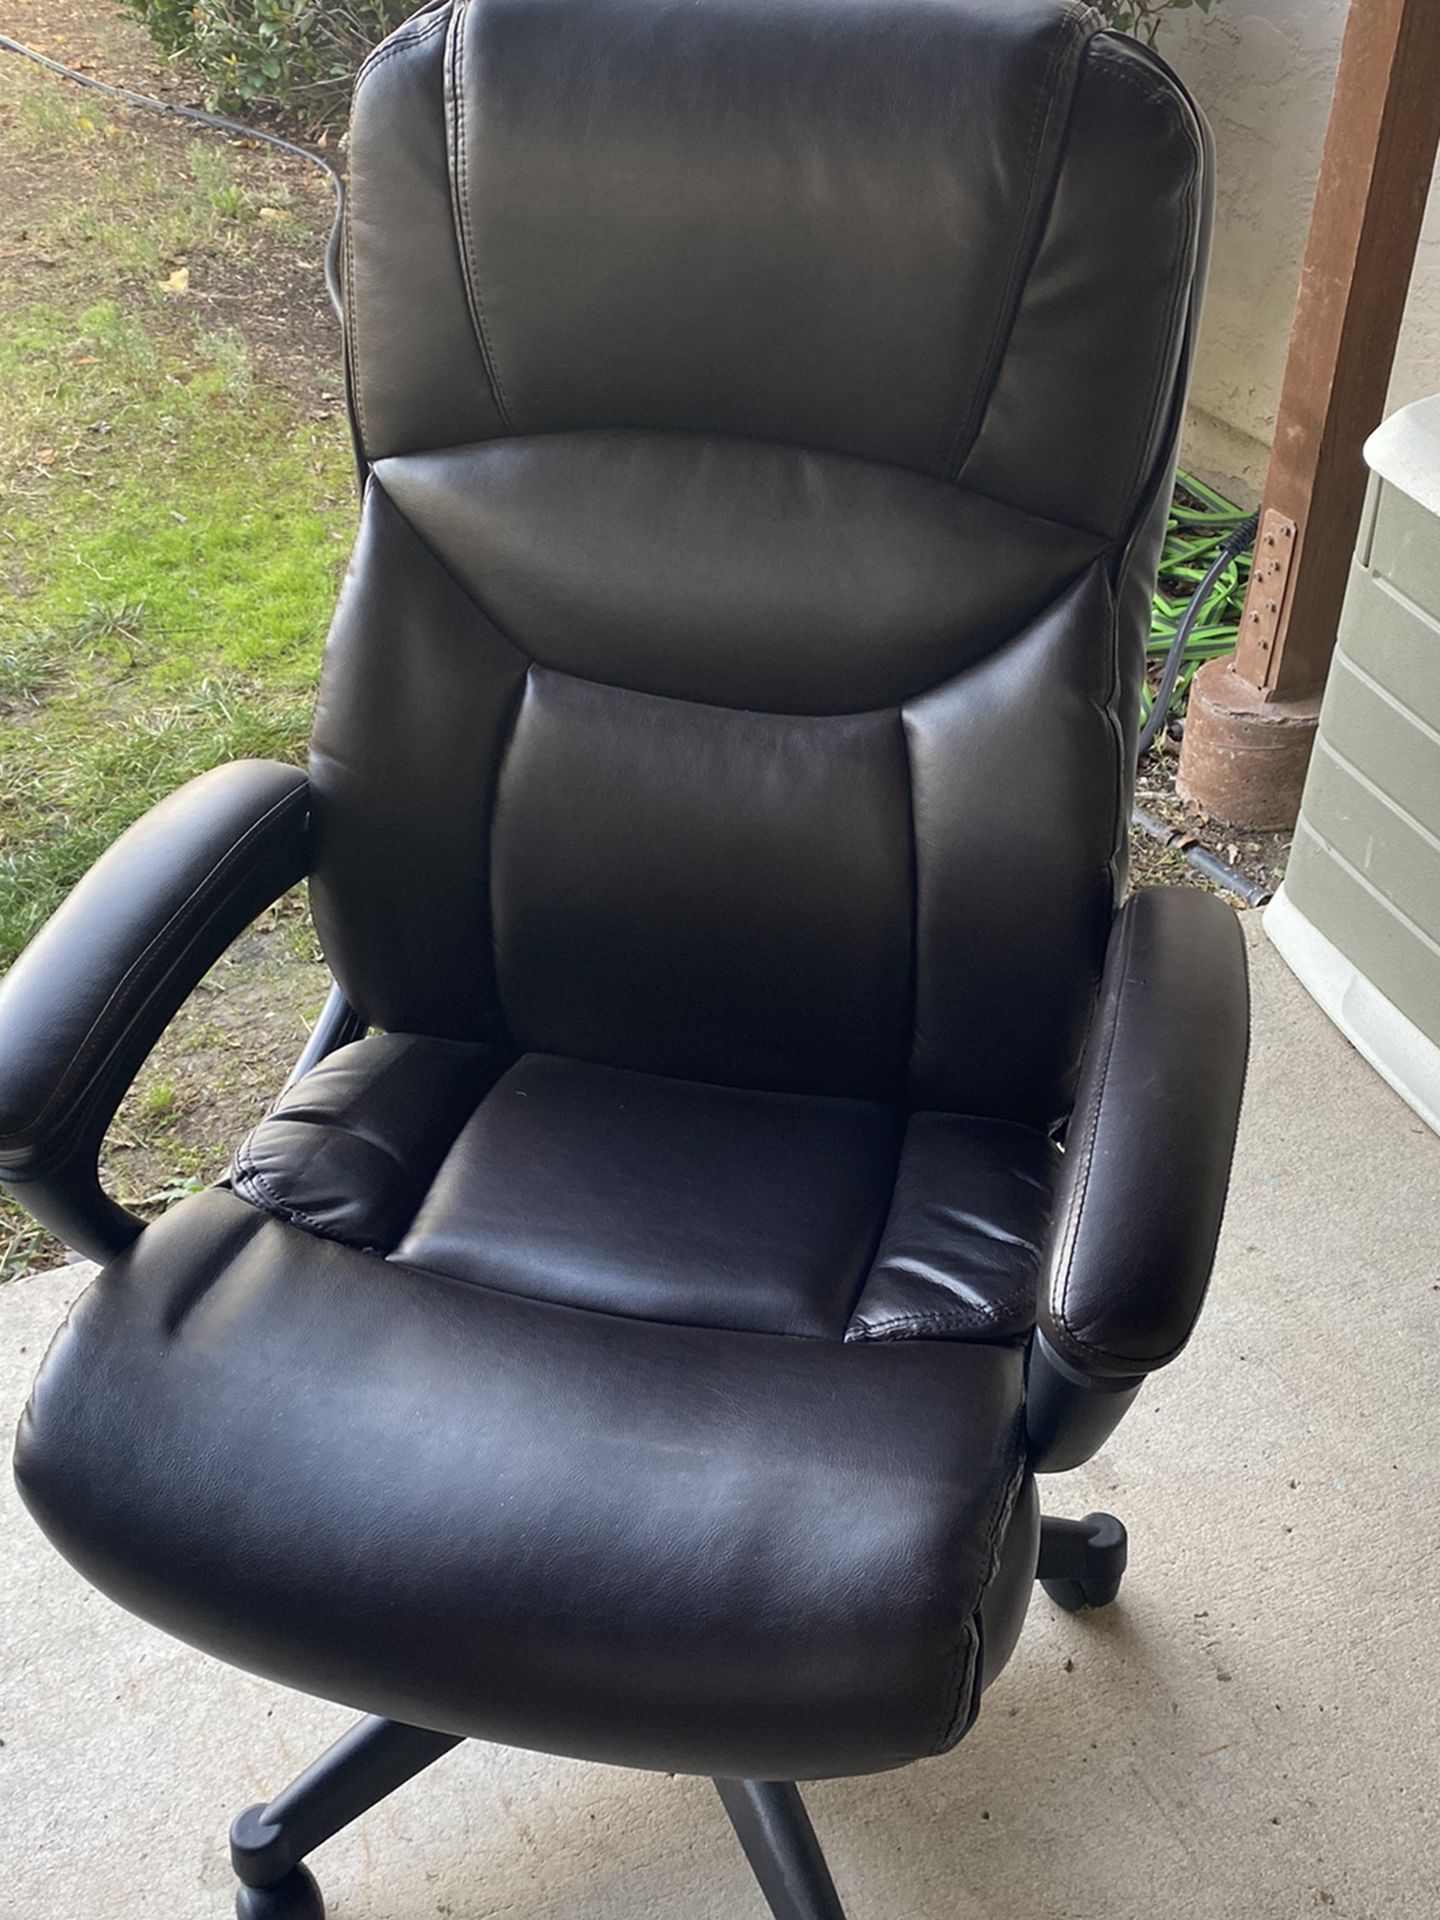 Office Depot Deluxe Chair